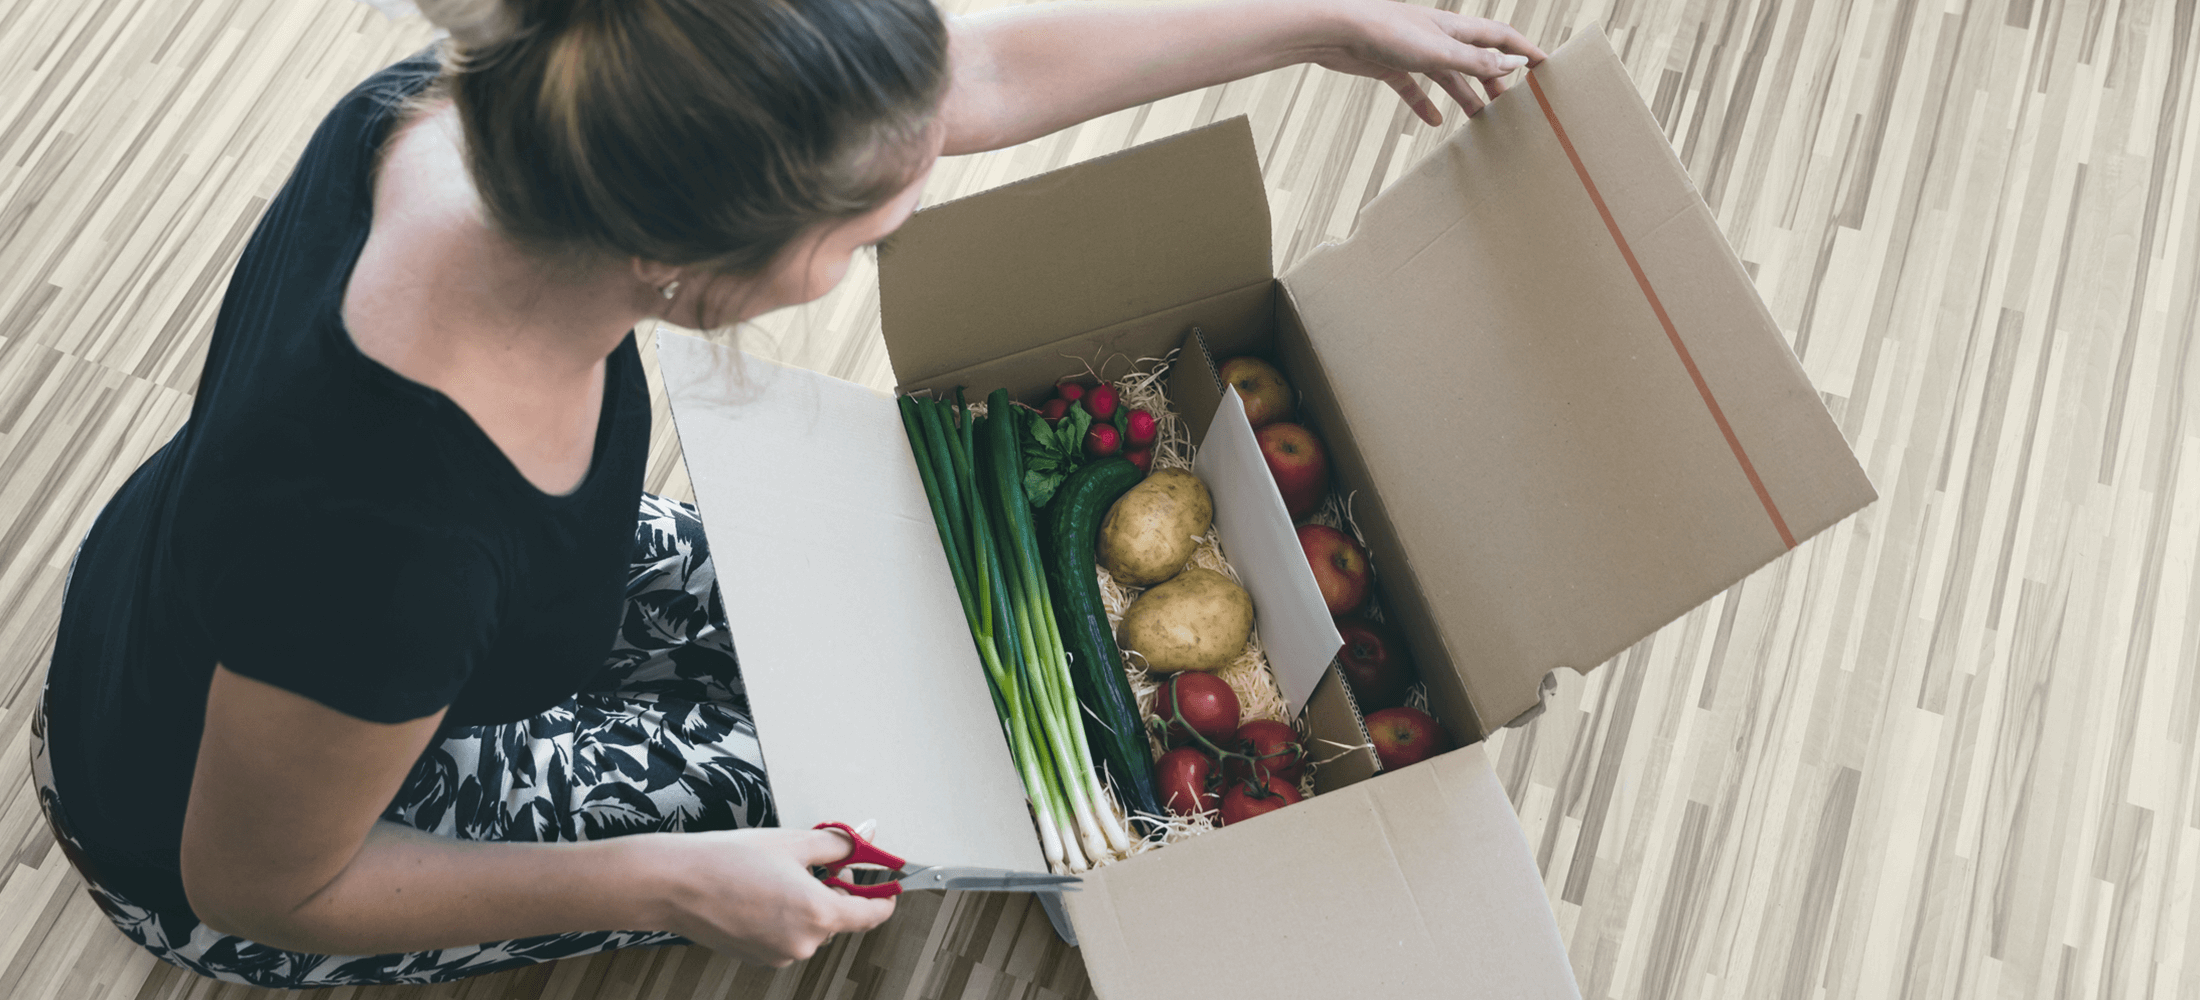 Staying fresh: How UK grocery retailers are innovating with delivery